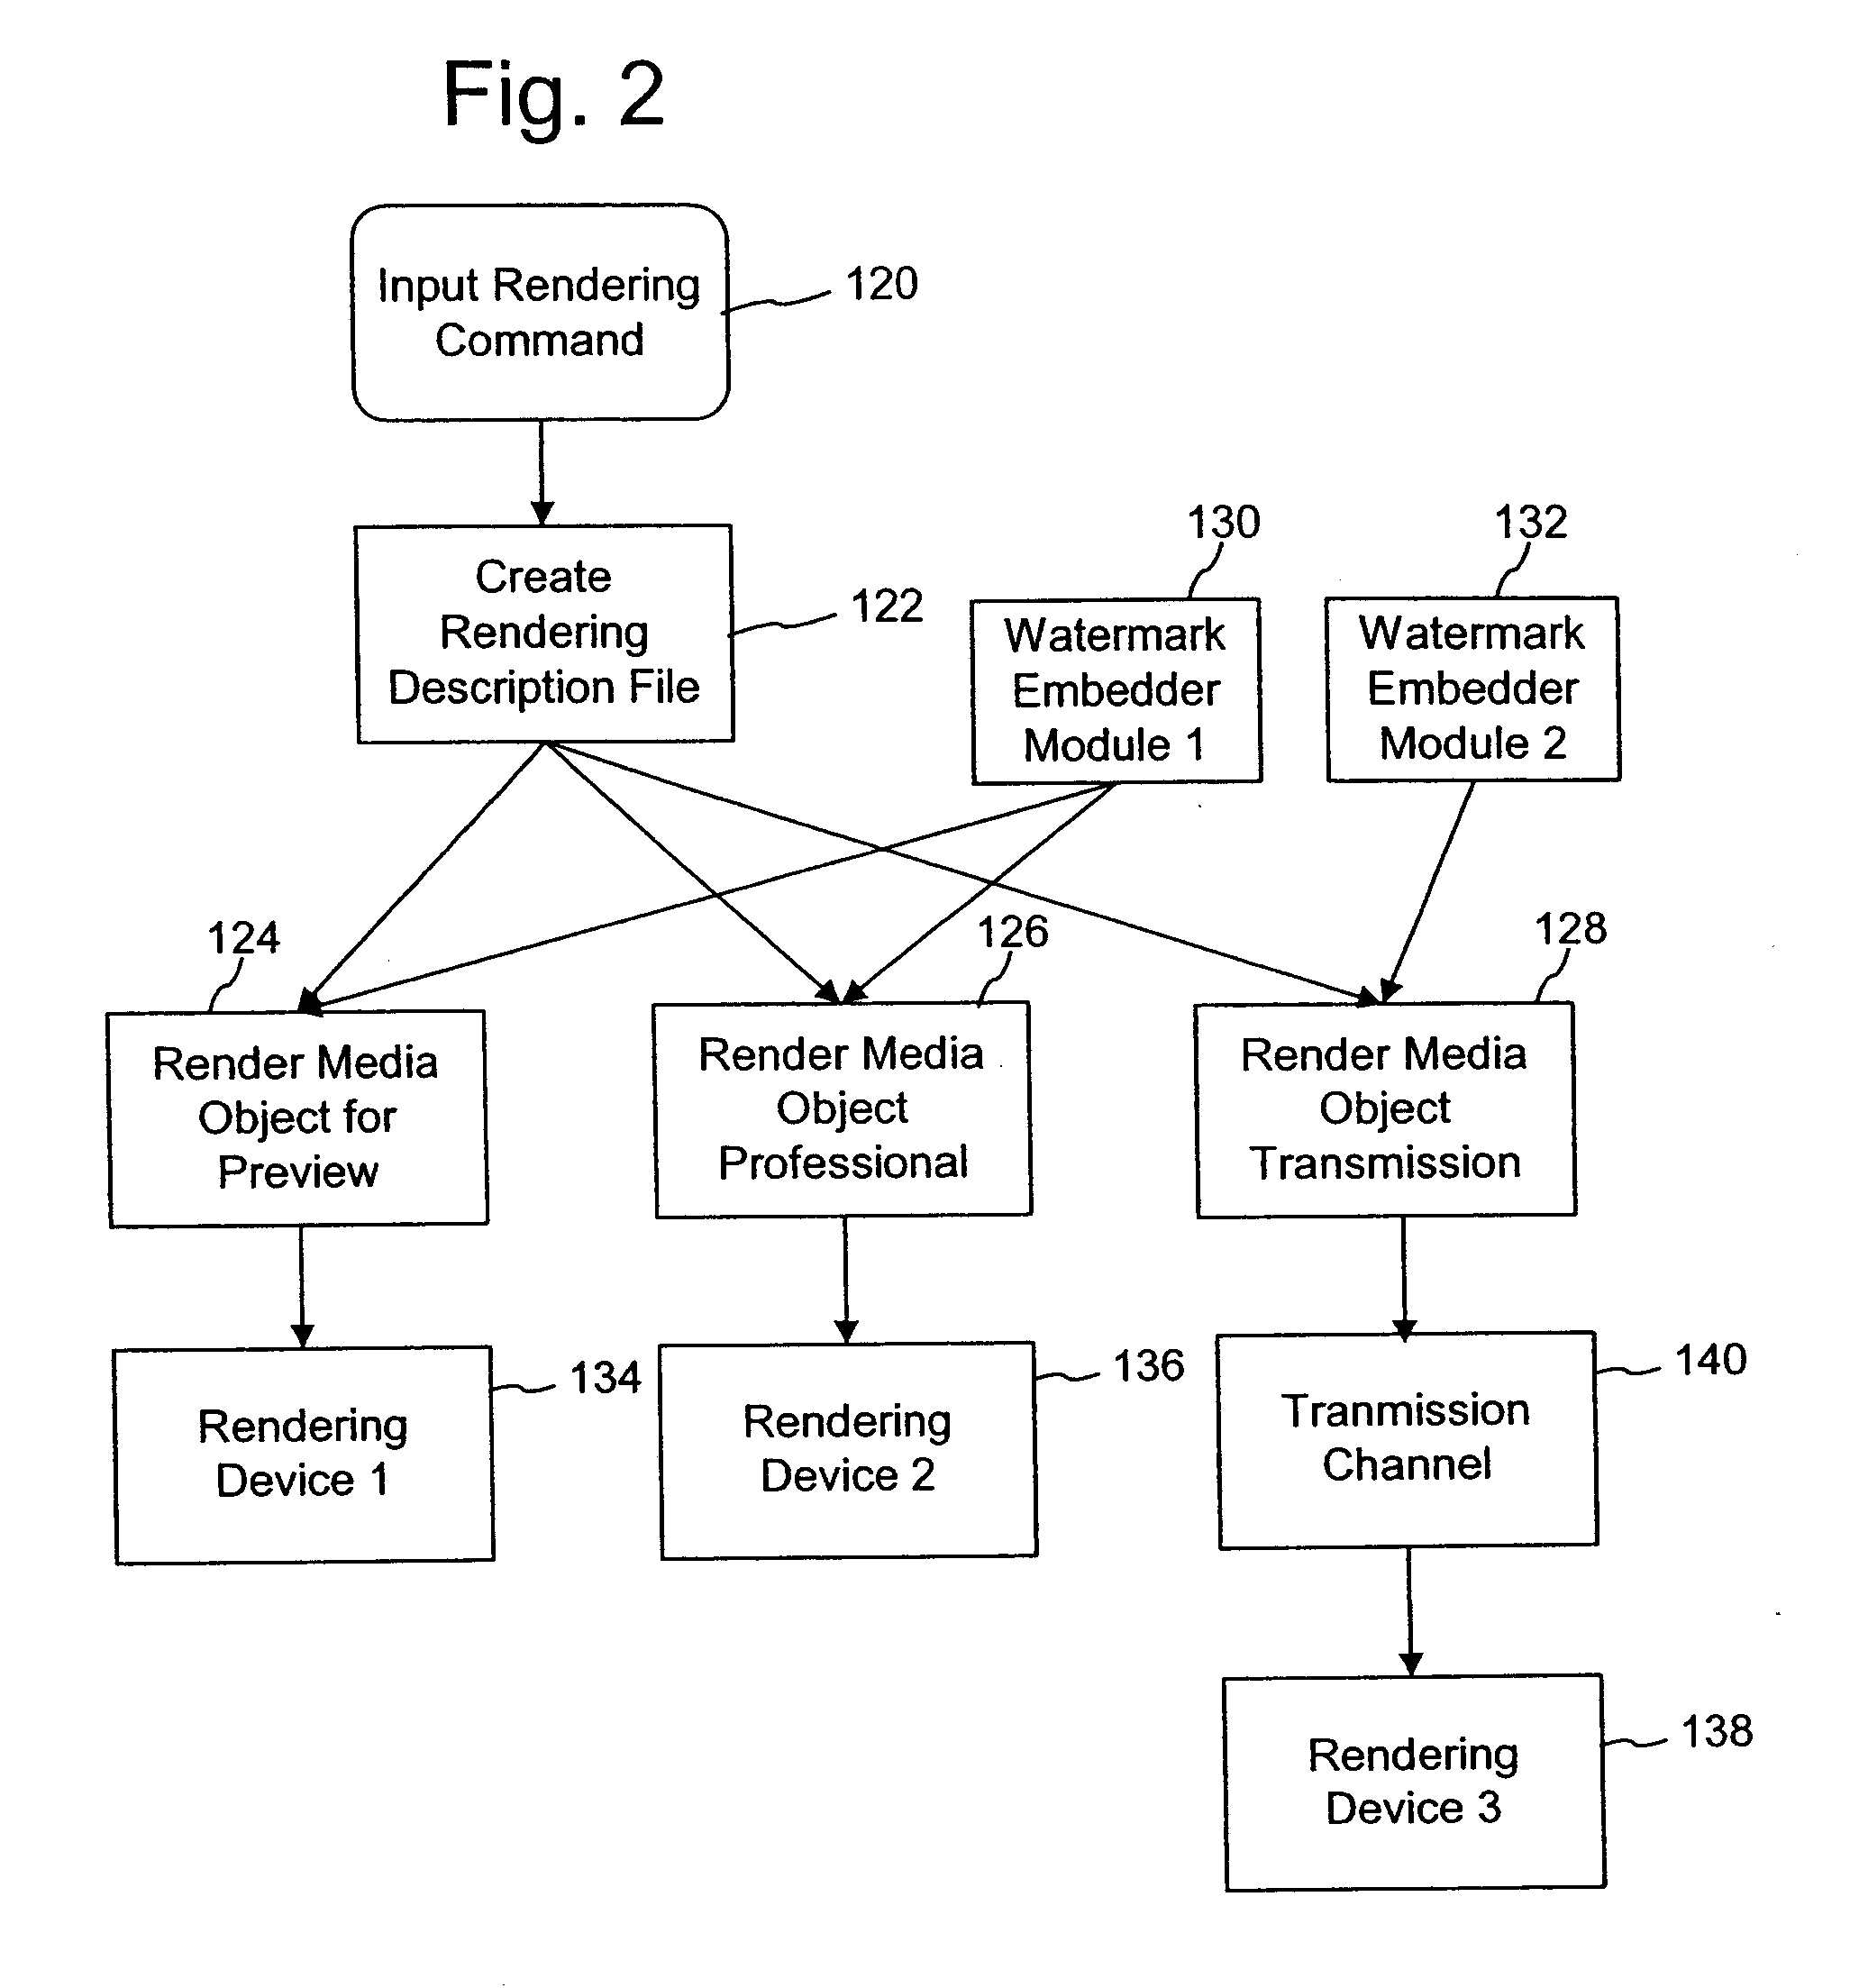 Watermark embedding functions adapted for transmission channels